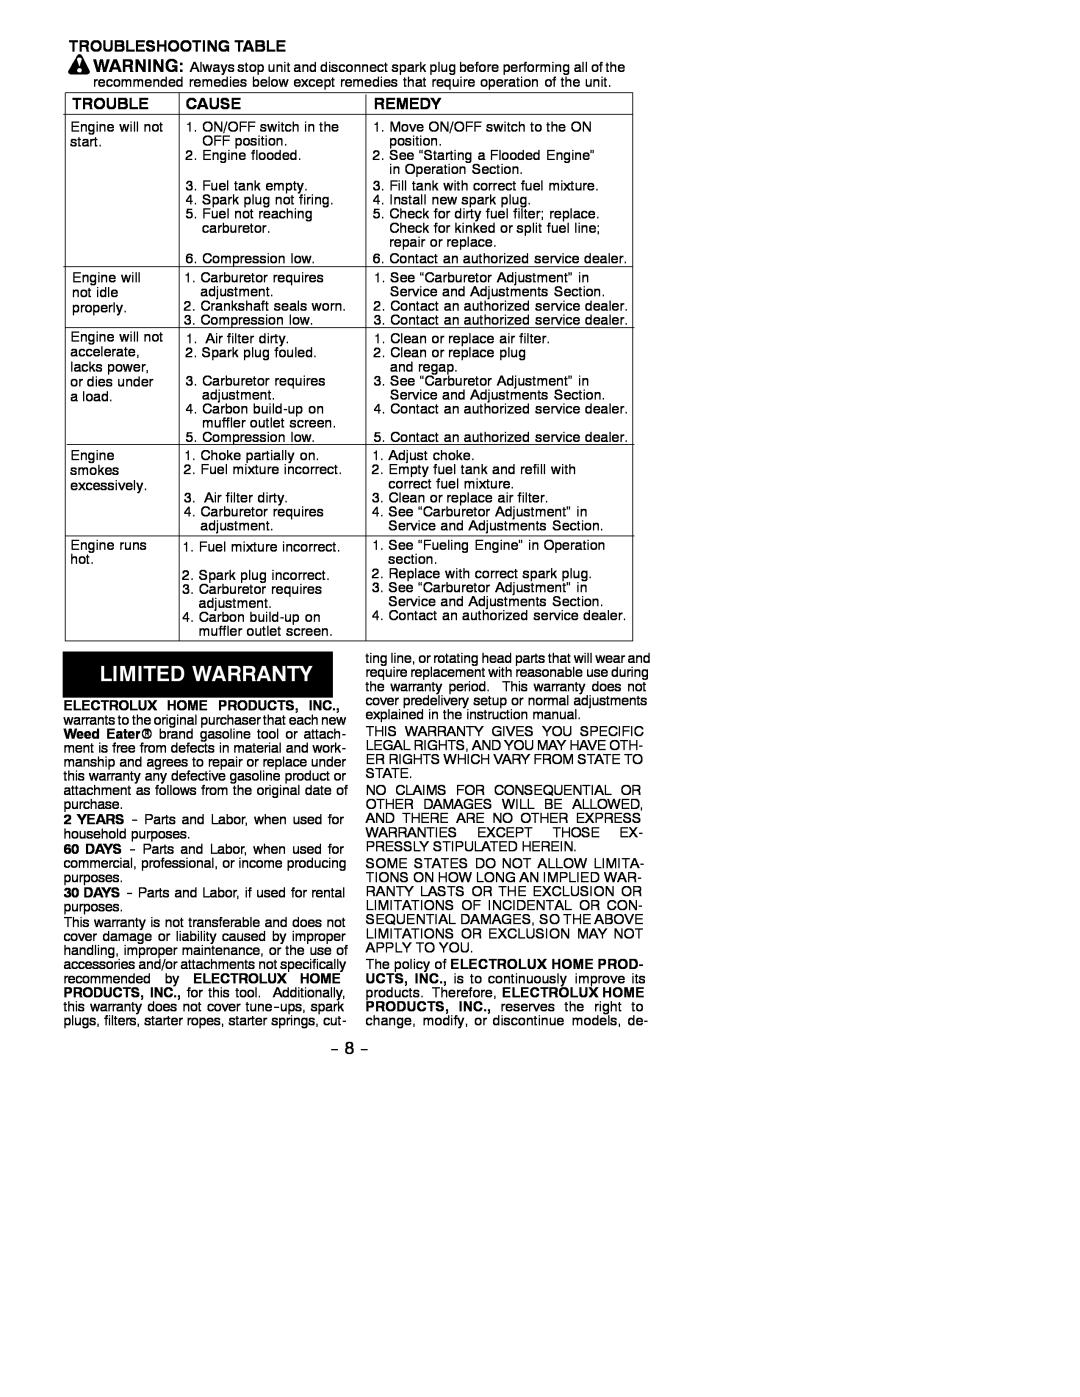 Weed Eater 530086901, GHT 220 Troubleshooting Table, Cause, Remedy, Electrolux, Home Products, Inc, by ELECTROLUX HOME 